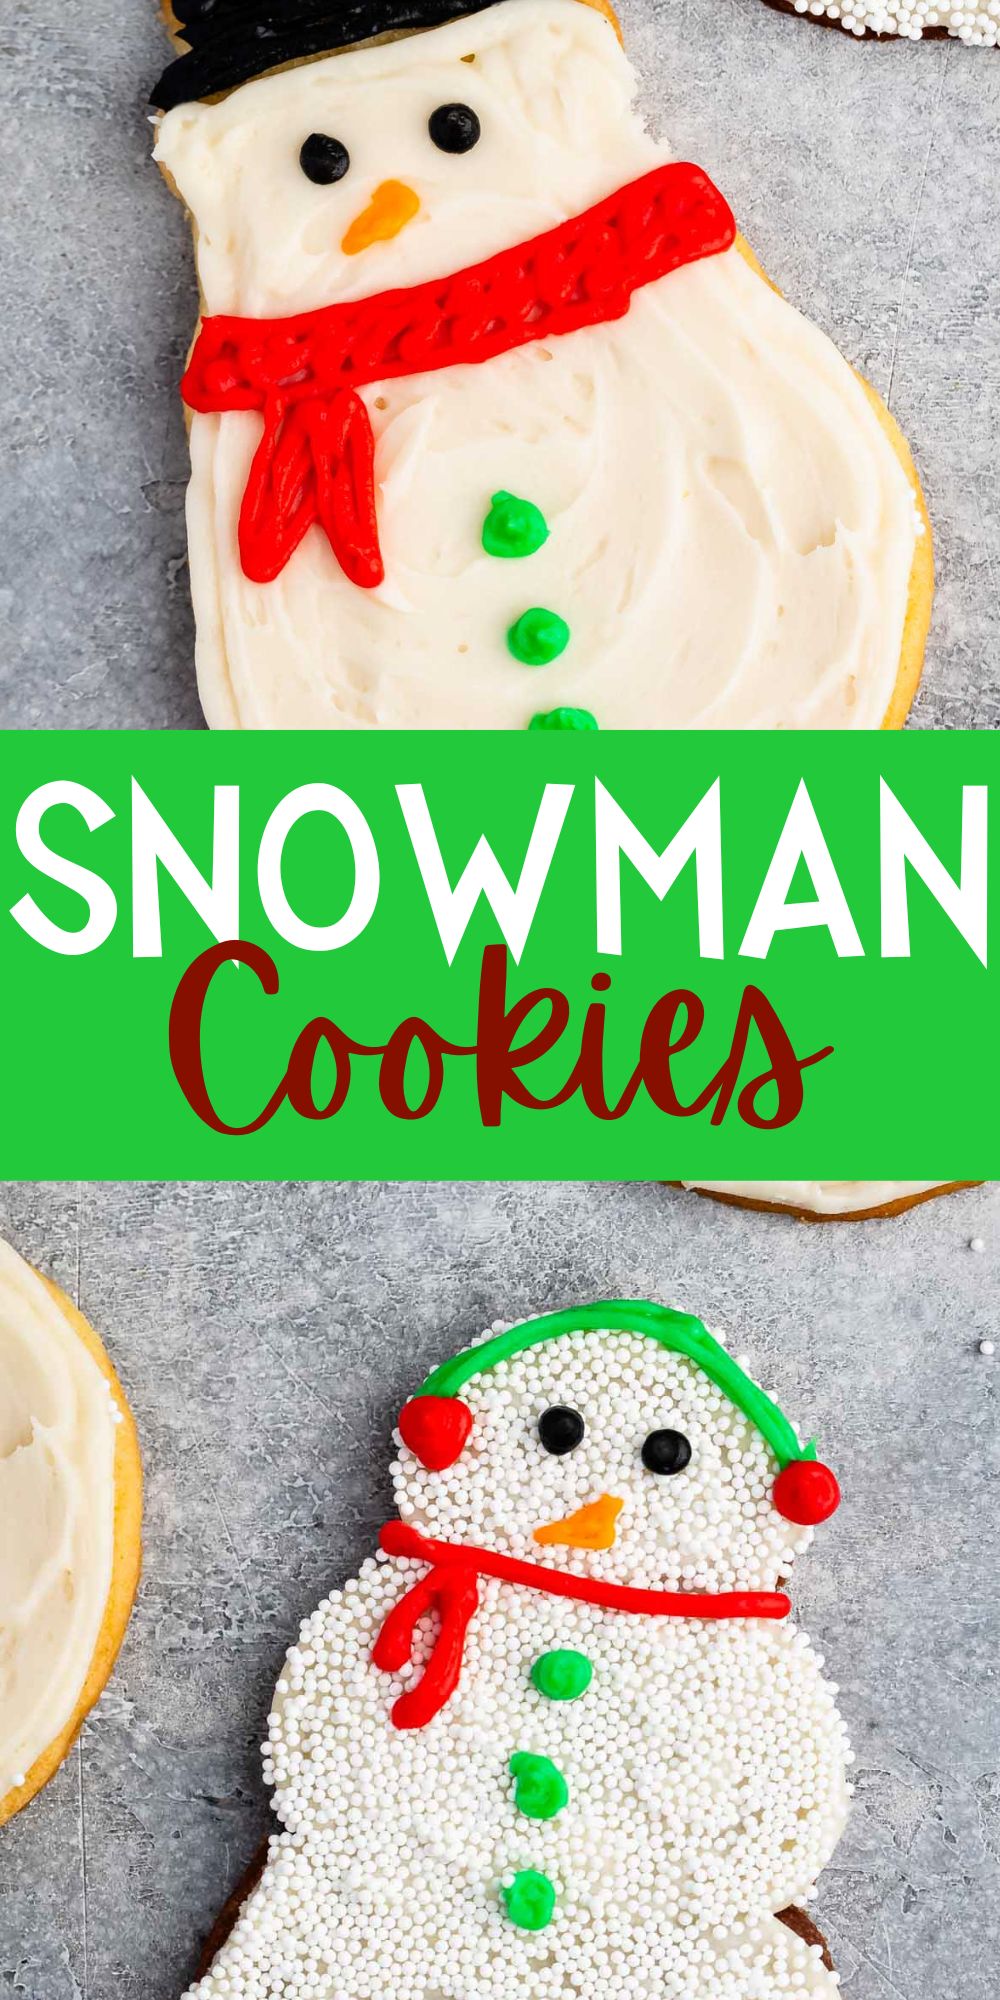 two photos of snowman cookies covered in white frosting and sprinkles and icing to replicate a snowman with words on the image.